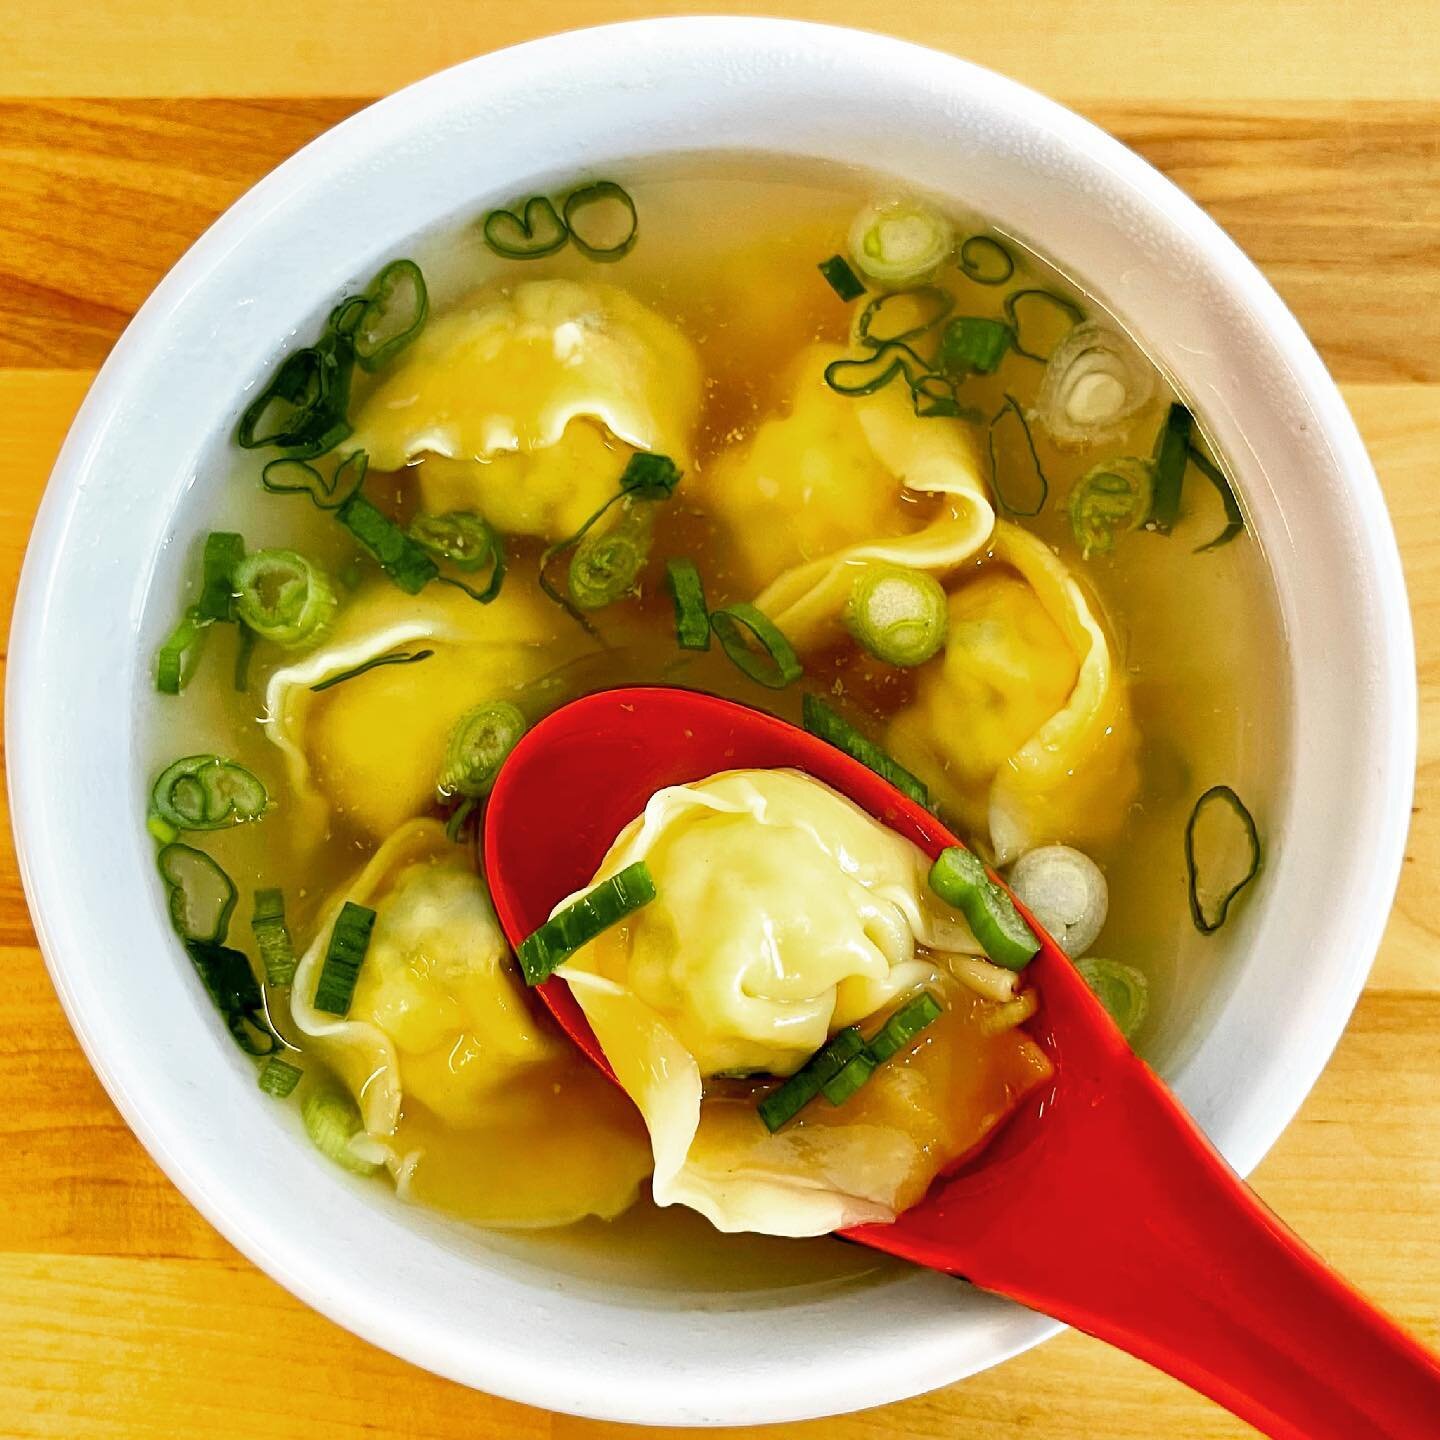 🚨 FISH WONTONS IN BROTH 🚨 
Round plump wontons filled with freshly ground white fish and cilantro. Get them in vegan or chicken broth for a comforting hearty soup. (Soy and pescatarian friendly) Order online, stop by our store, or get them delivere